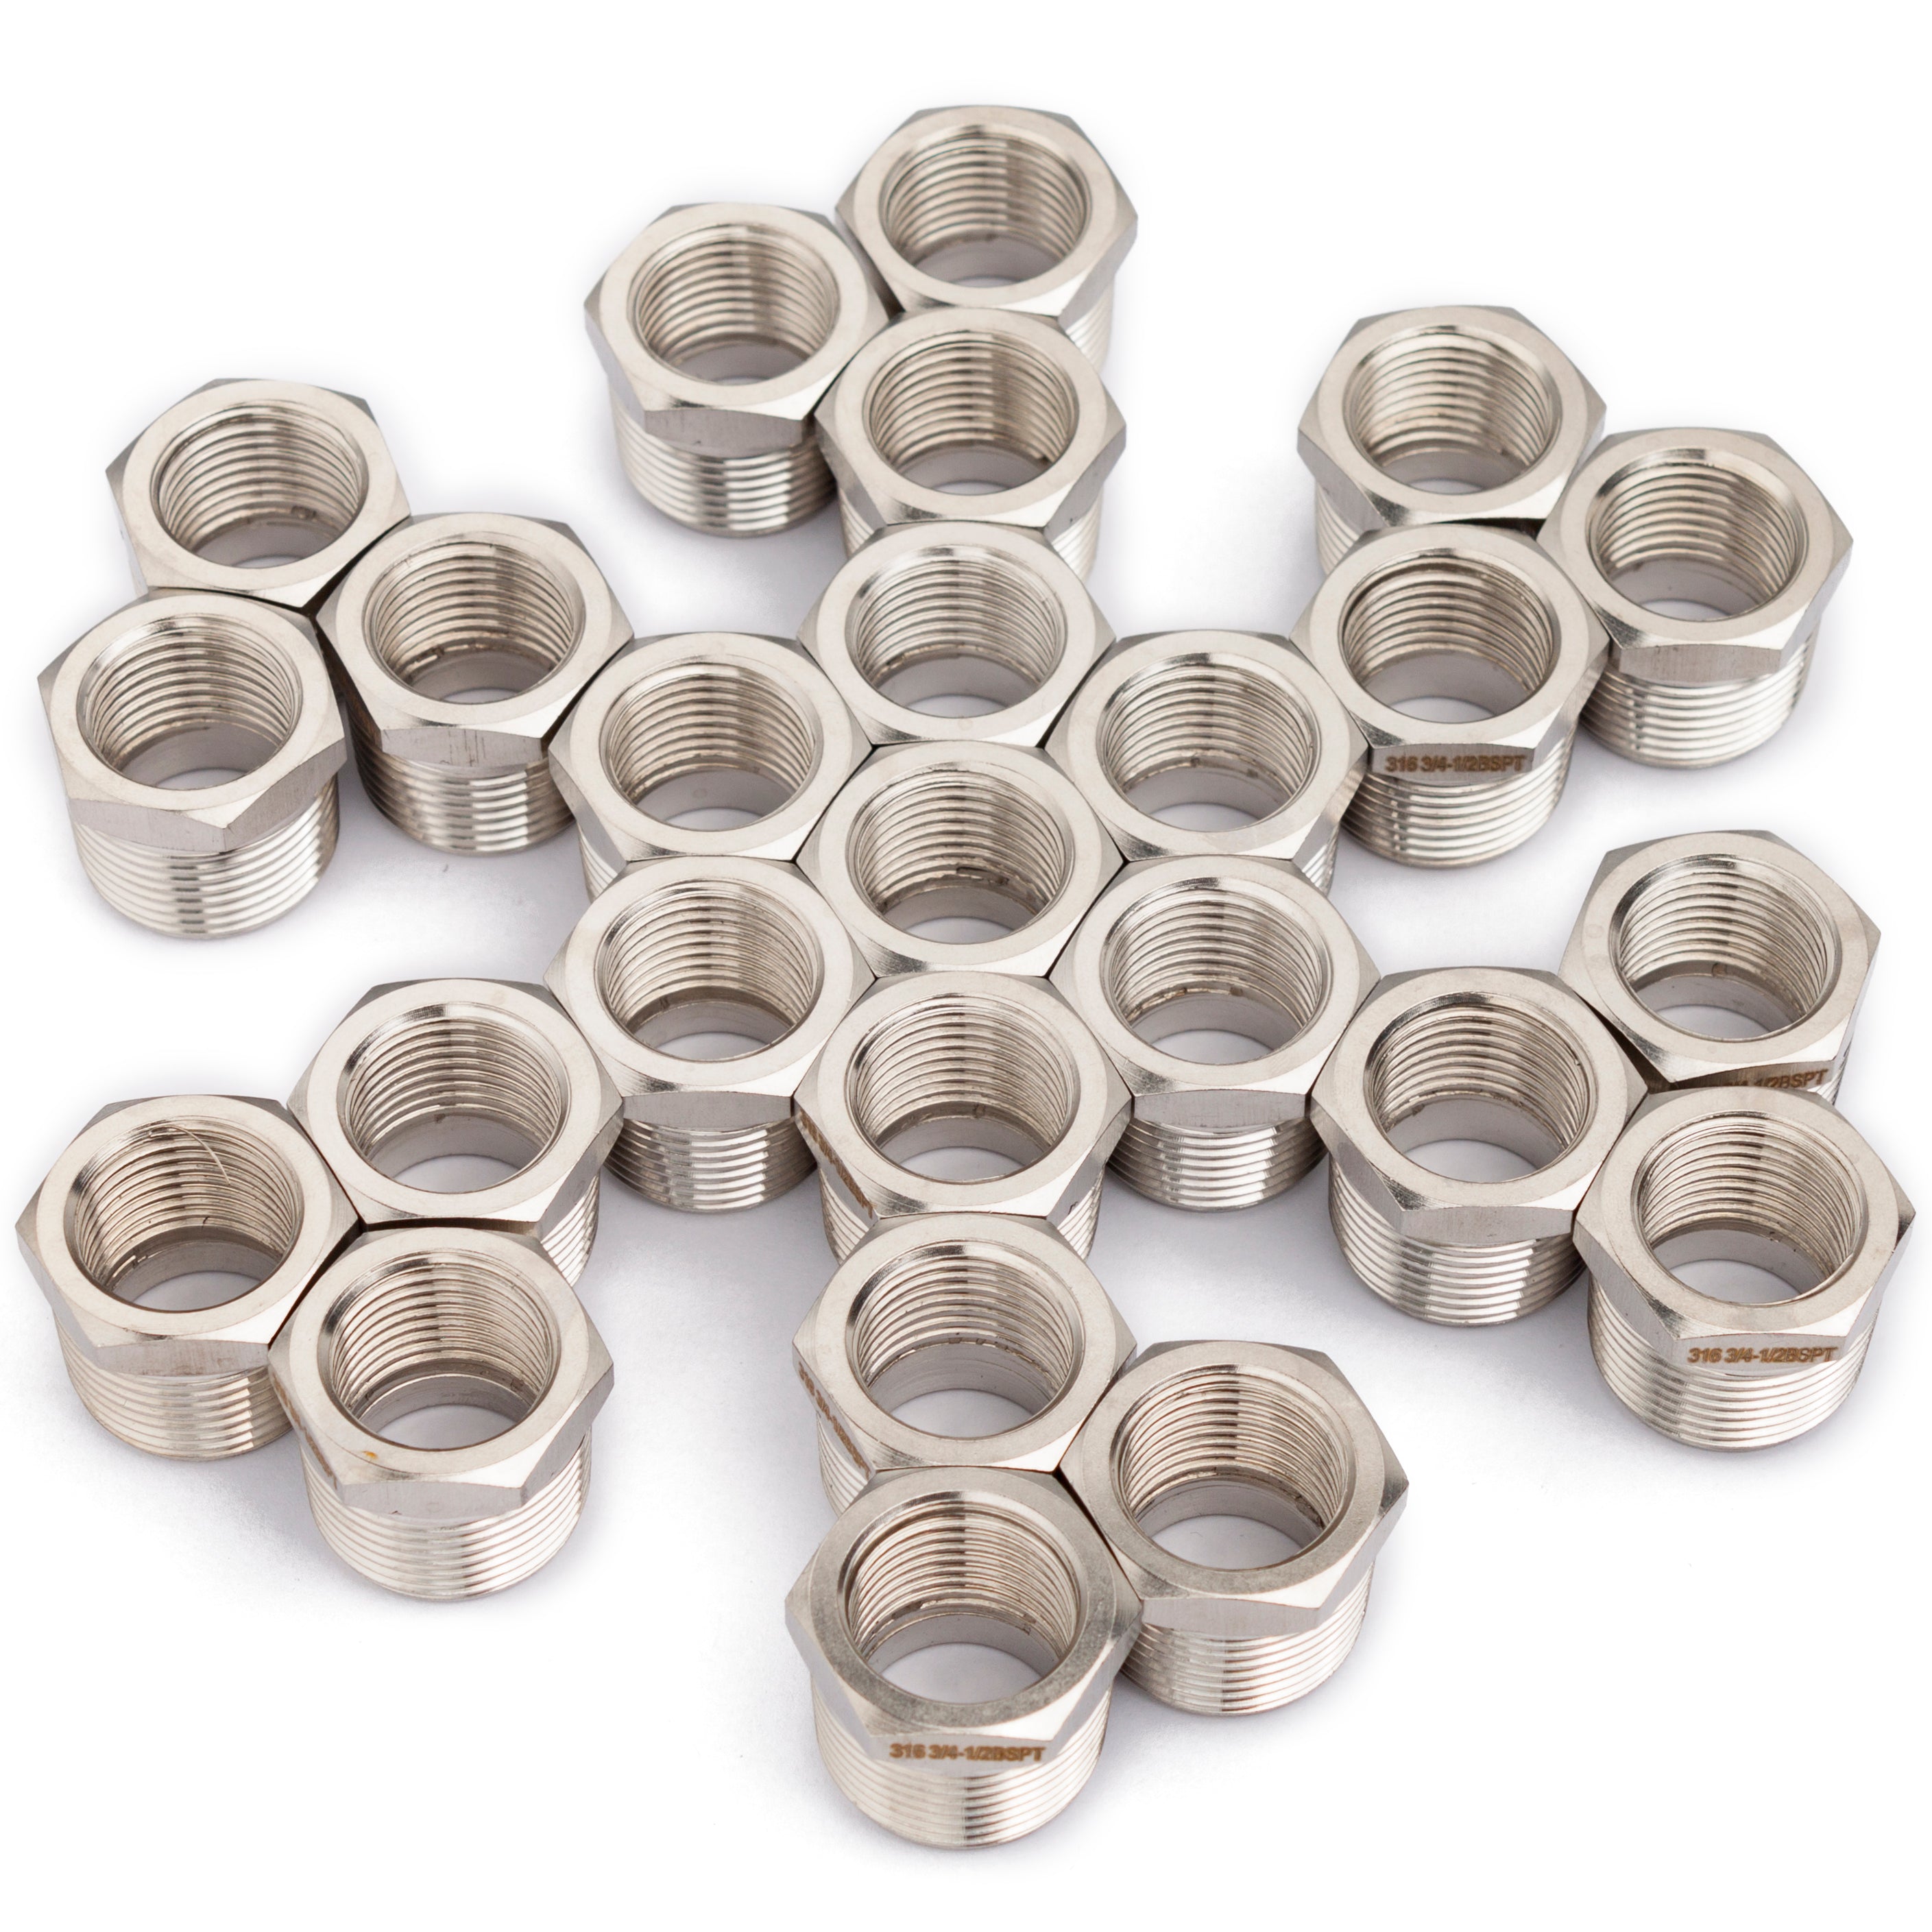 LTWFITTING Stainless Steel 316 Pipe Hex Bushing Reducer Fittings 3/4-Inch Male BSPT x 1/2-Inch£¨13mm) Female BSPP (Pack of 25)